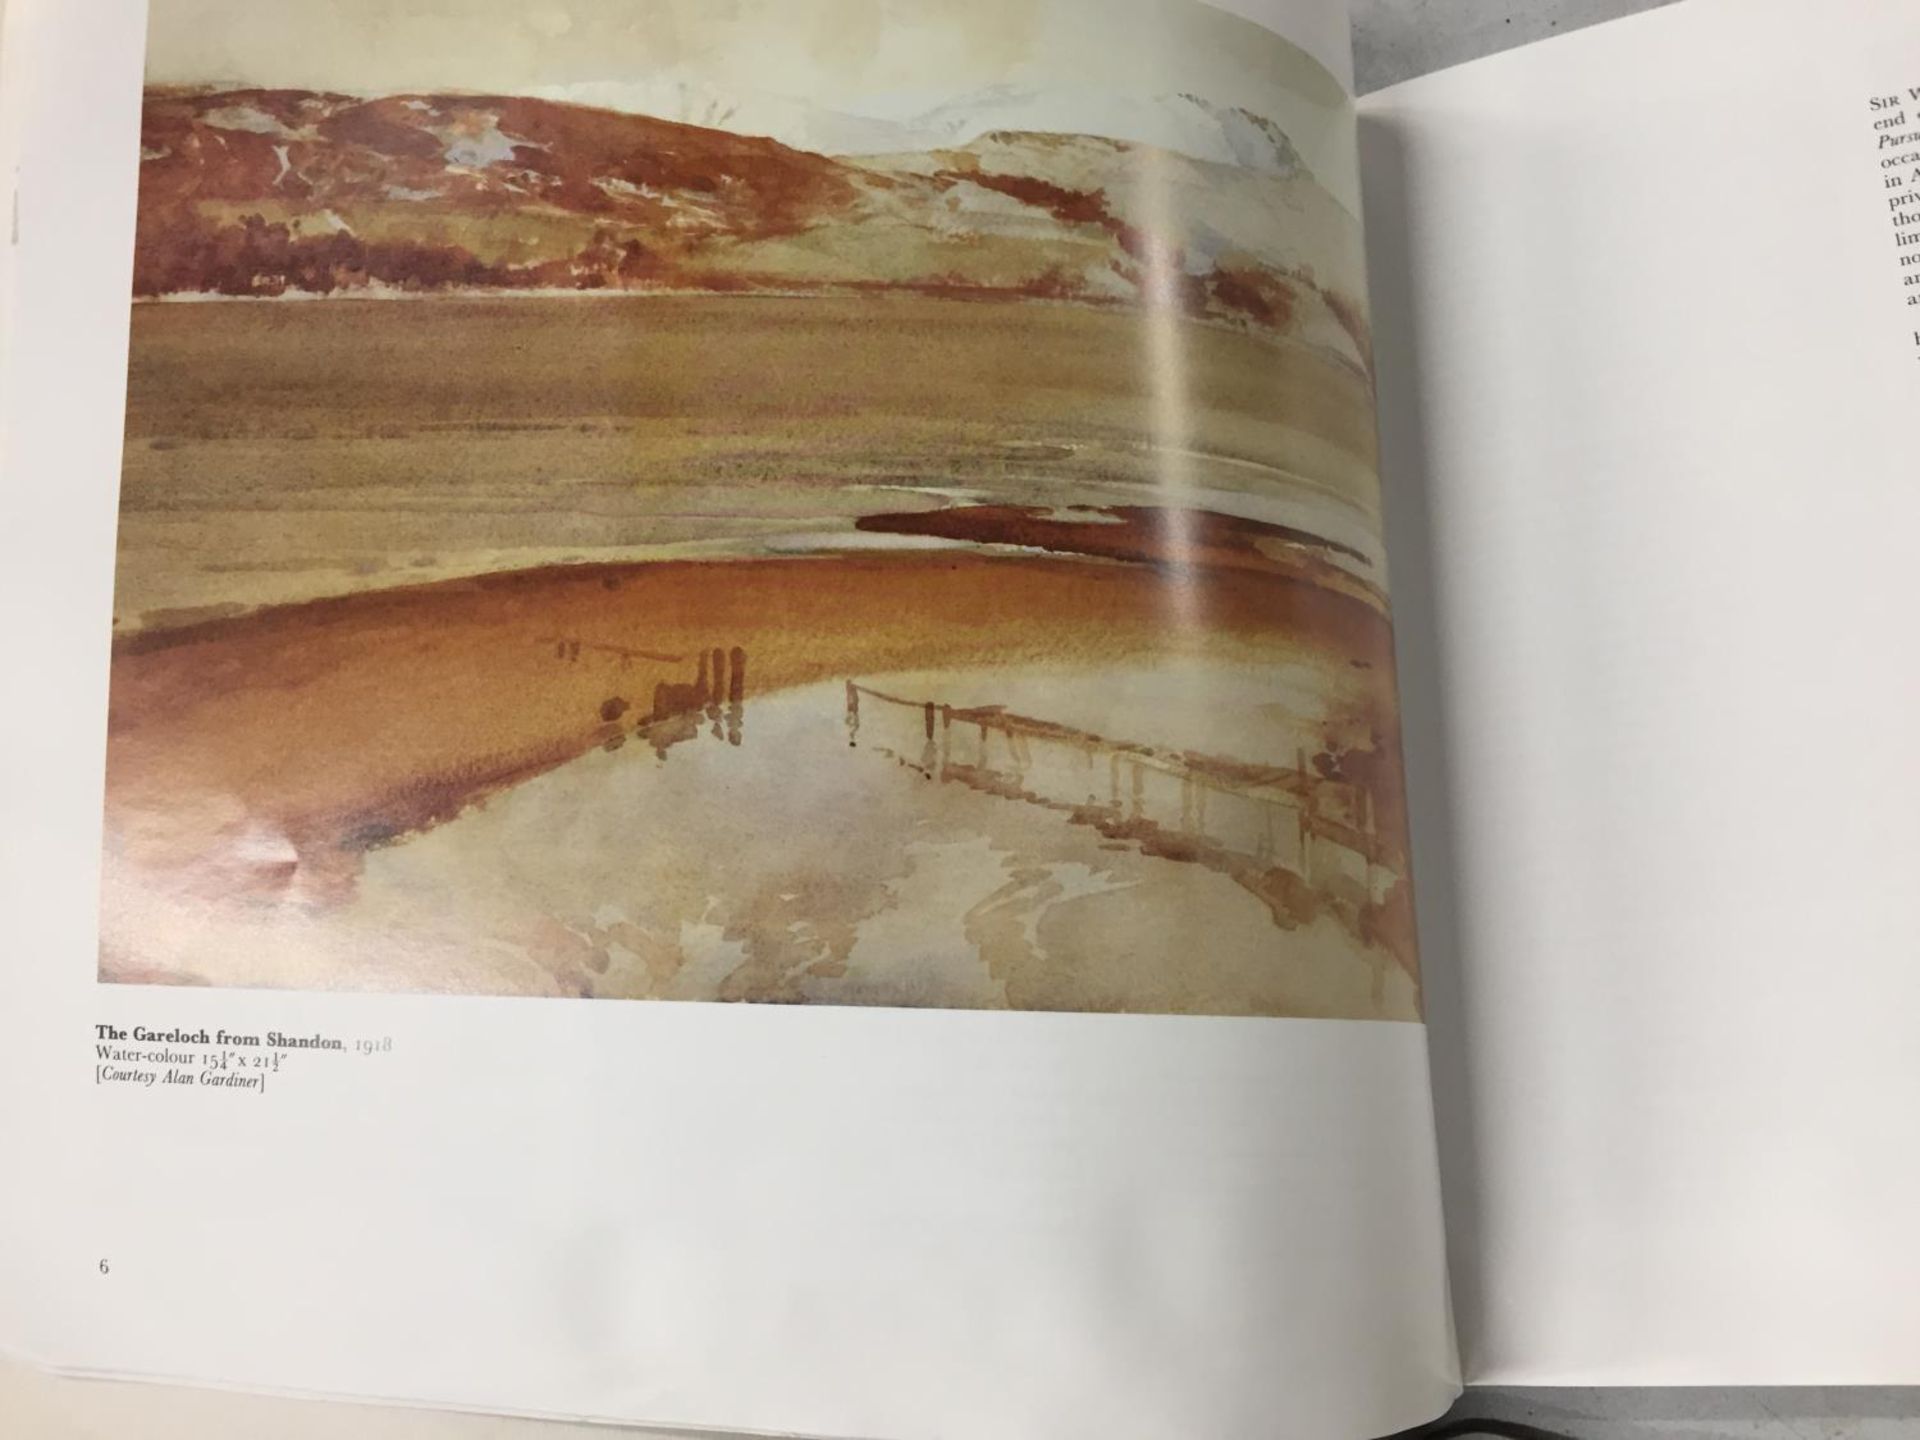 A BOOK ON THE LIFE AND ART OF SIR WILLIAM RUSSELL FLINT - Image 3 of 5